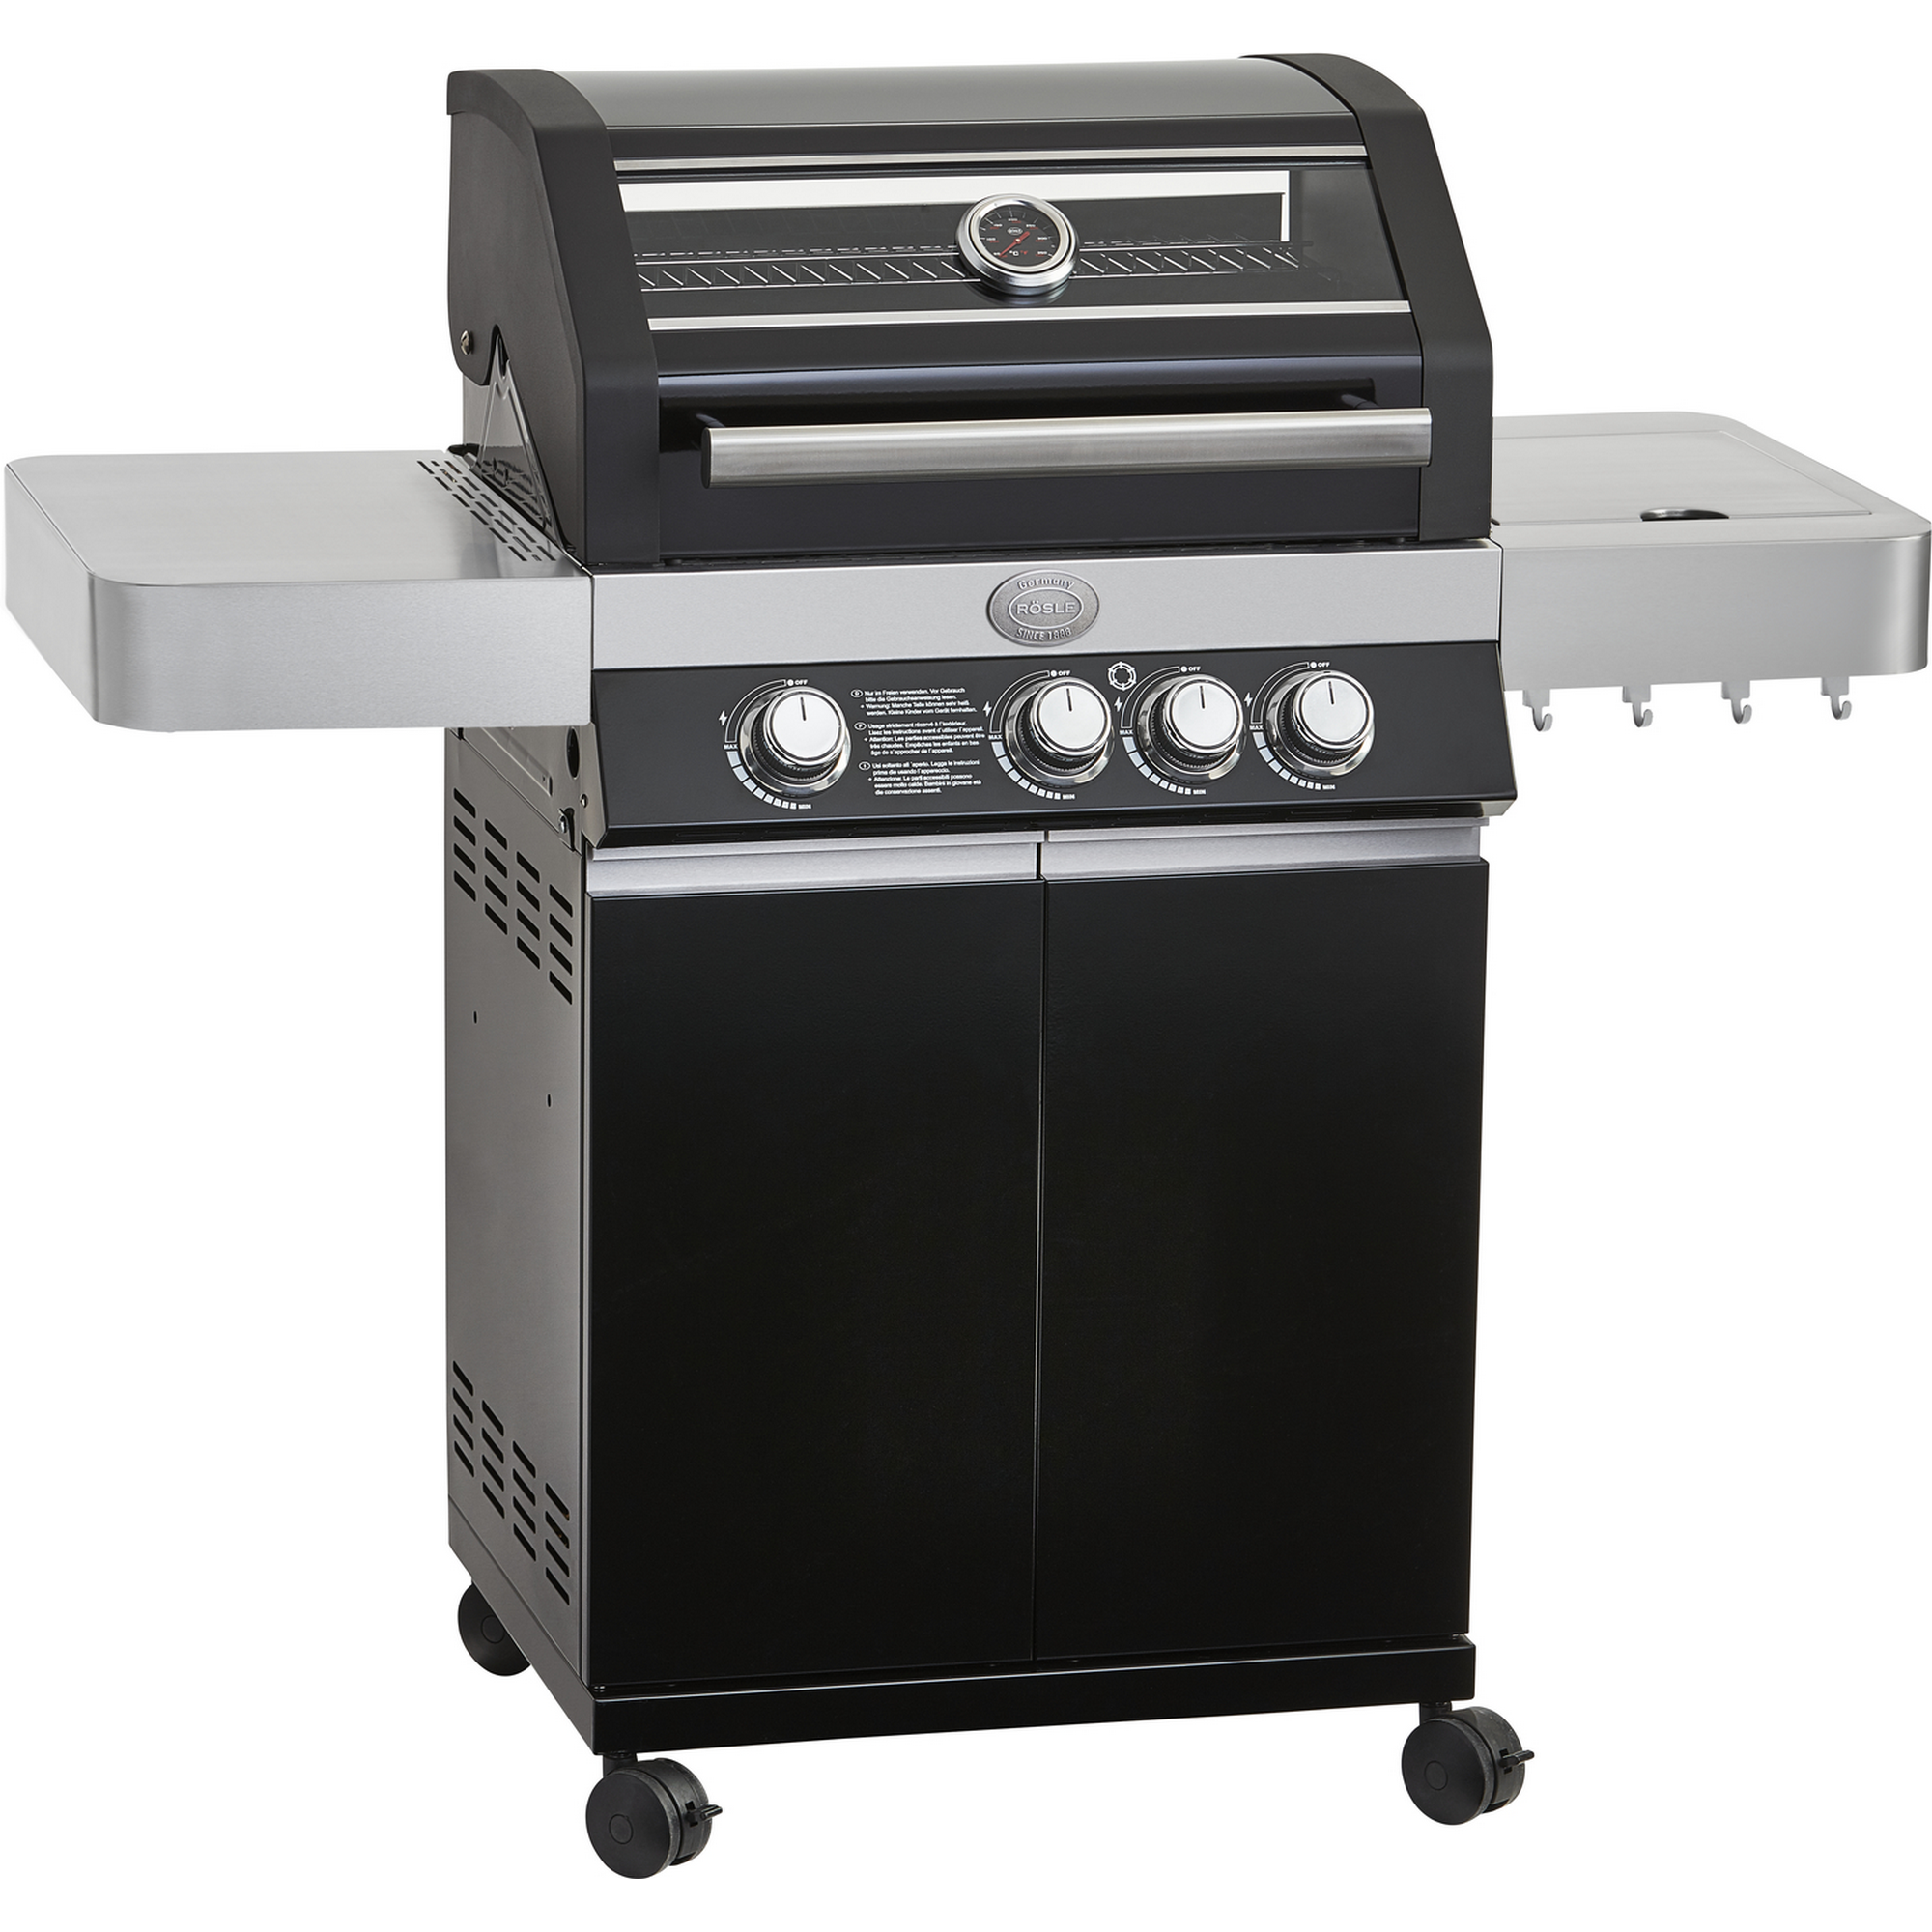 Gasgrill 'BBQ-Station Videro G3' schwarz + product picture